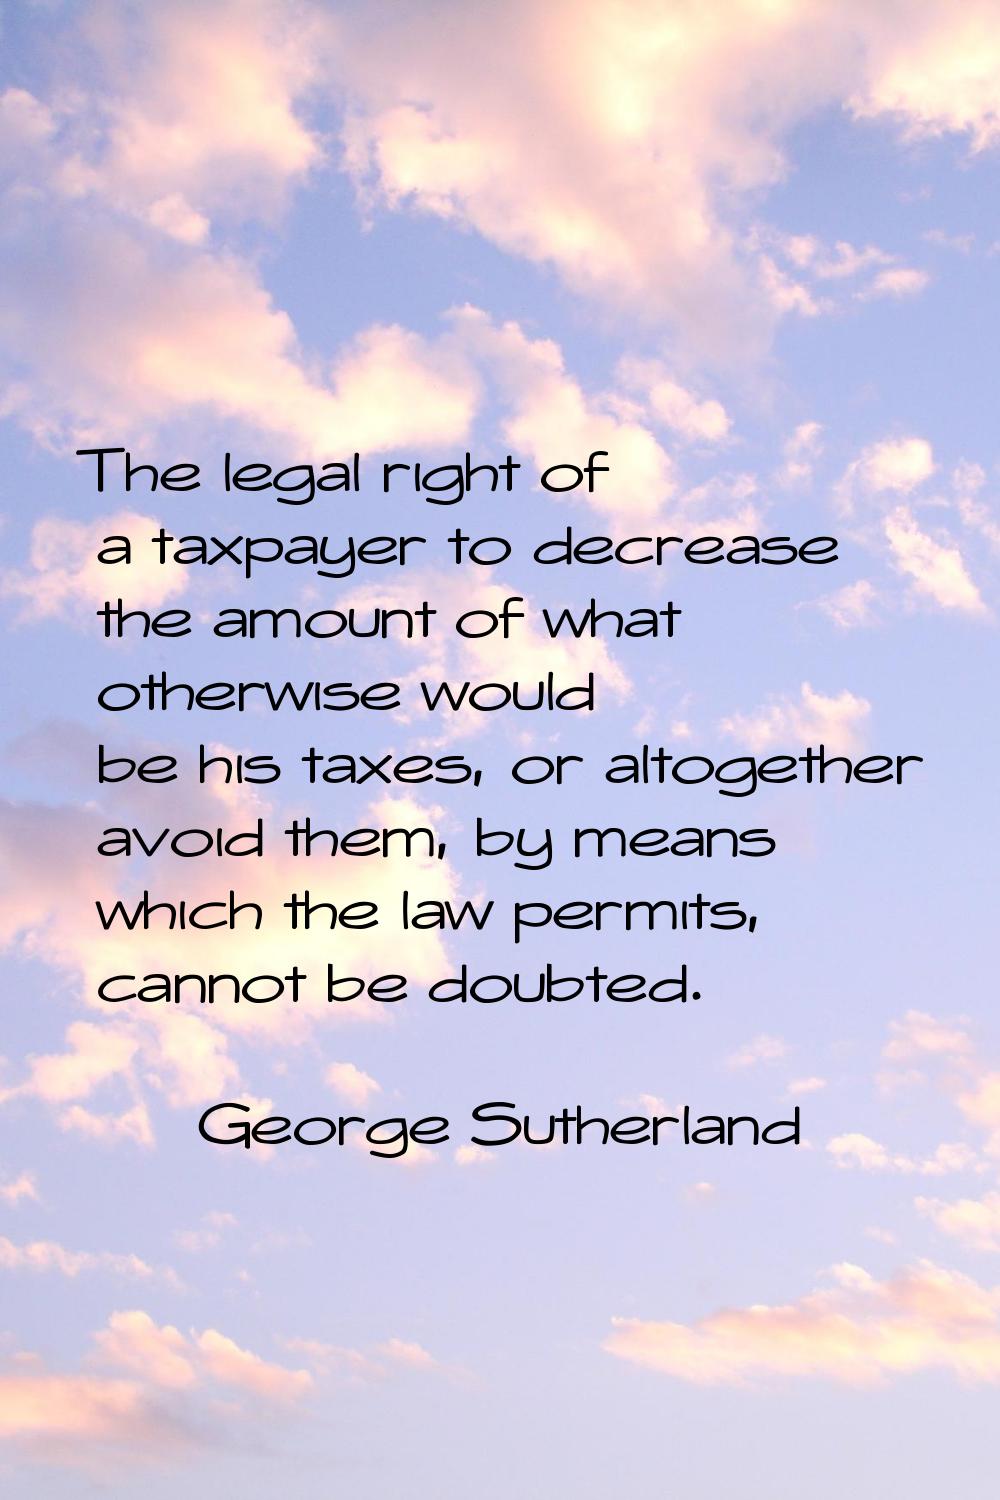 The legal right of a taxpayer to decrease the amount of what otherwise would be his taxes, or altog